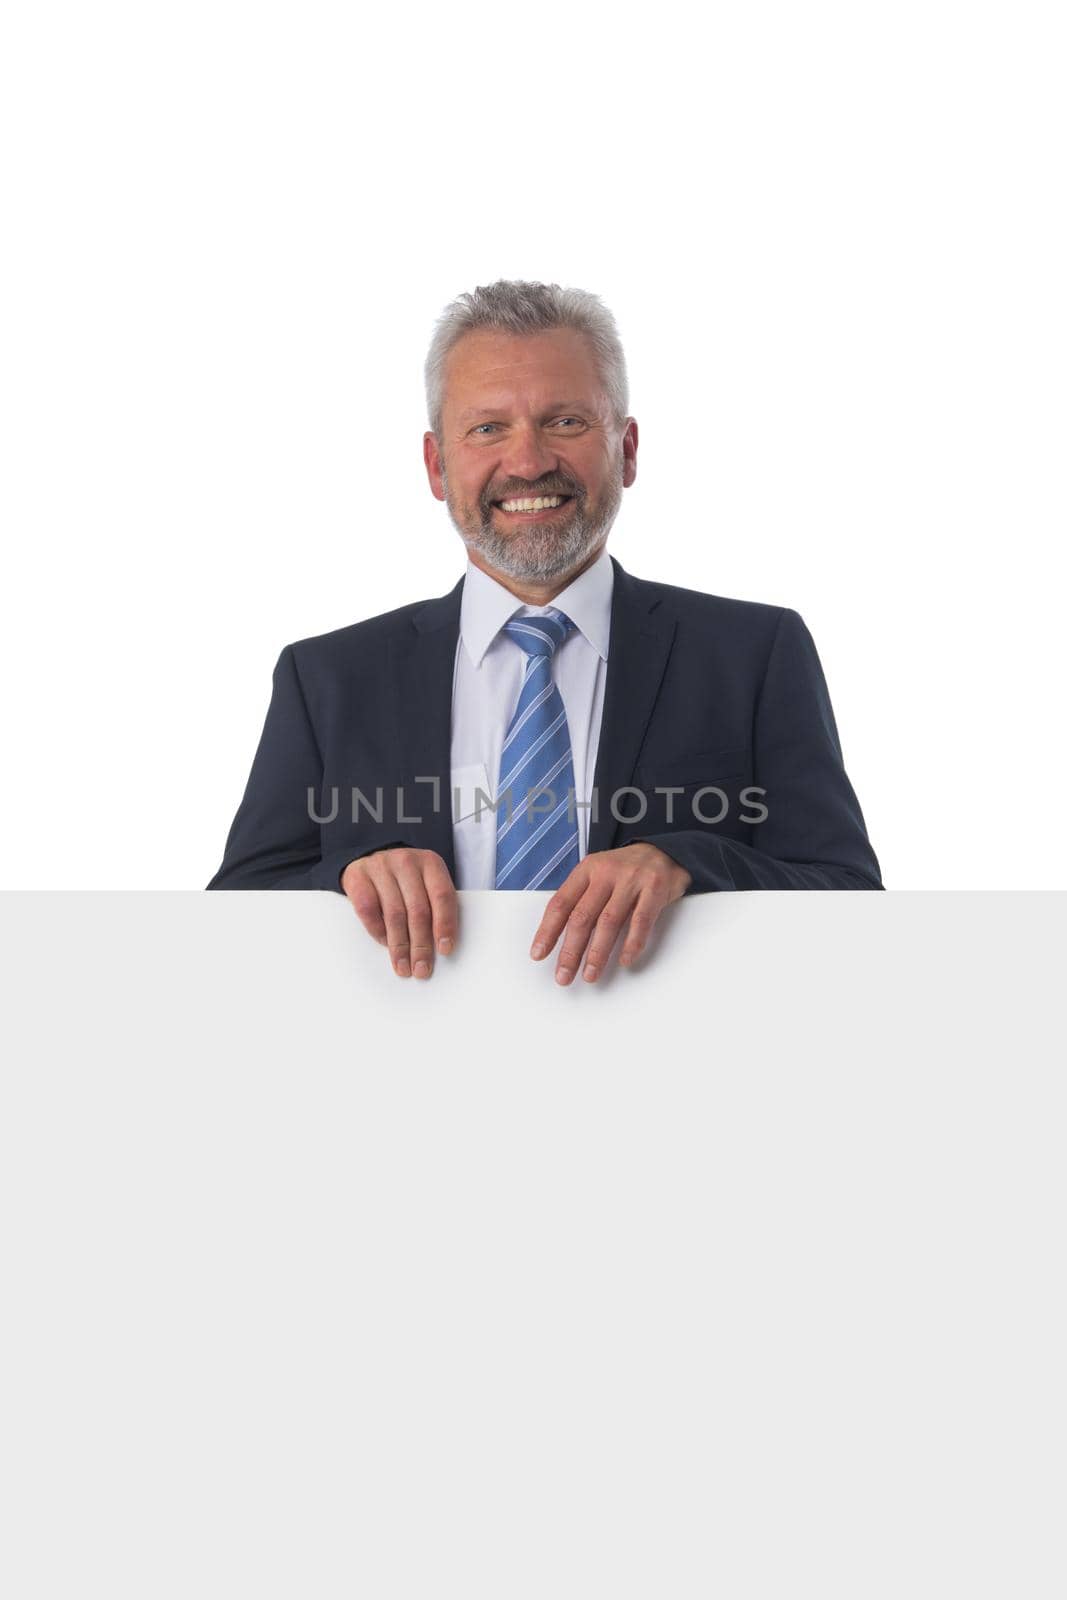 A smiling mature businessman holding a white panel and gesturing isolated on white background